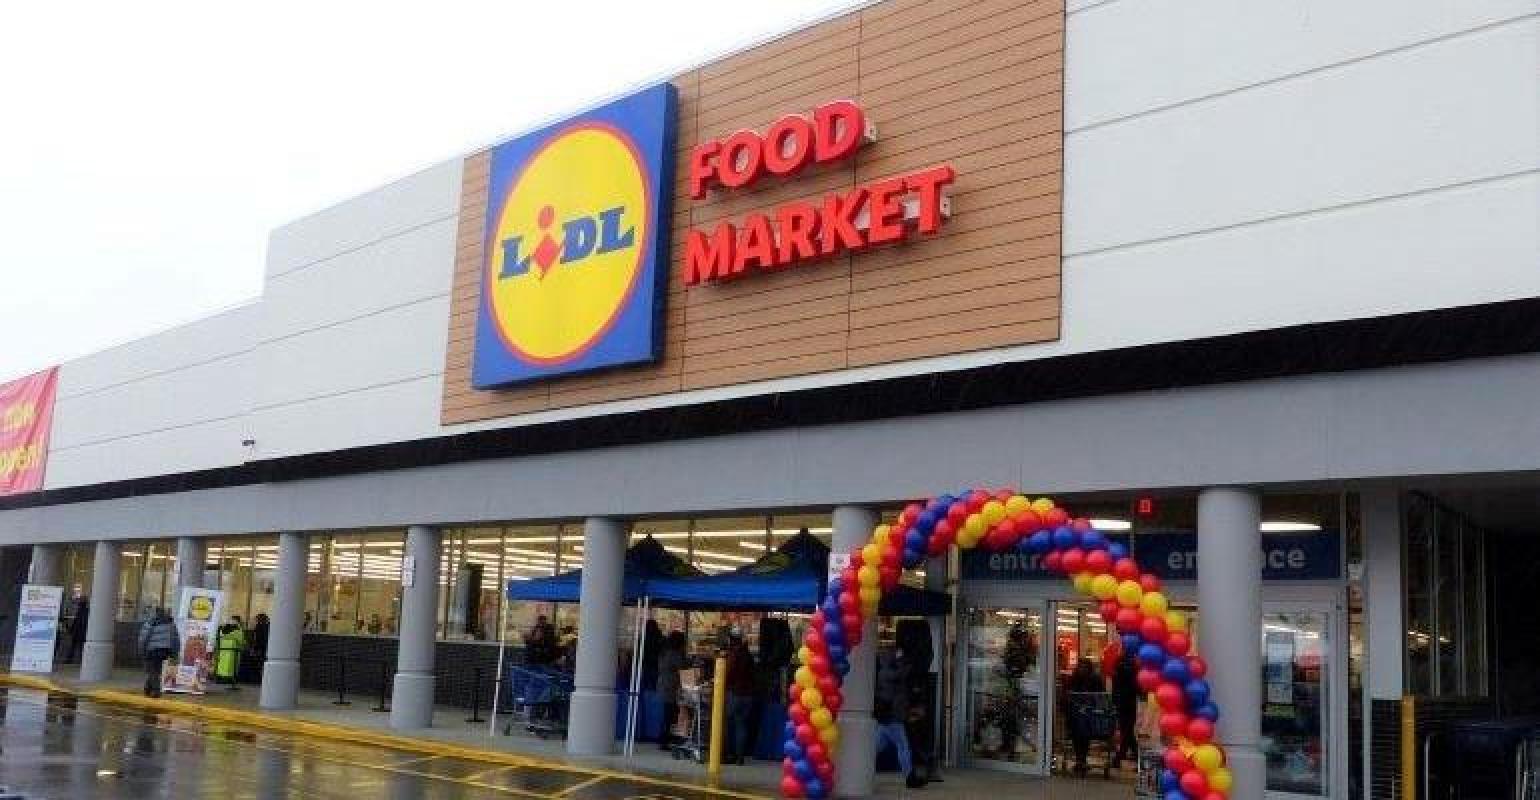 Sociologie inschakelen Schema Lidl powers up U.S. expansion with another 50 stores | Supermarket News